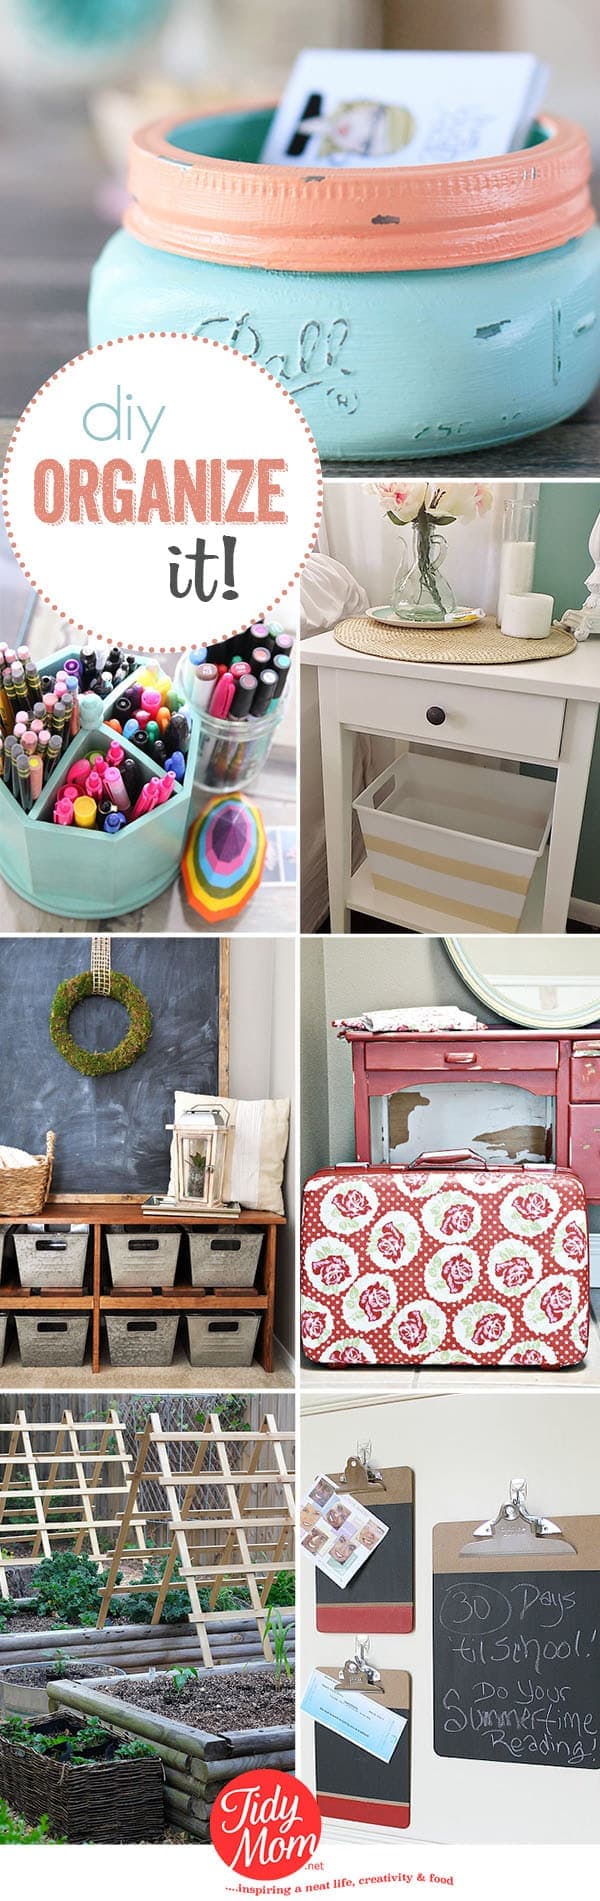 I think most of us will agree, and organized life is a happy life. Good organization can make or break a space. Here are some clever, easy and space saving DIY organization ideas t for you to create a space that works for you, not against you. Details at TidyMom.net